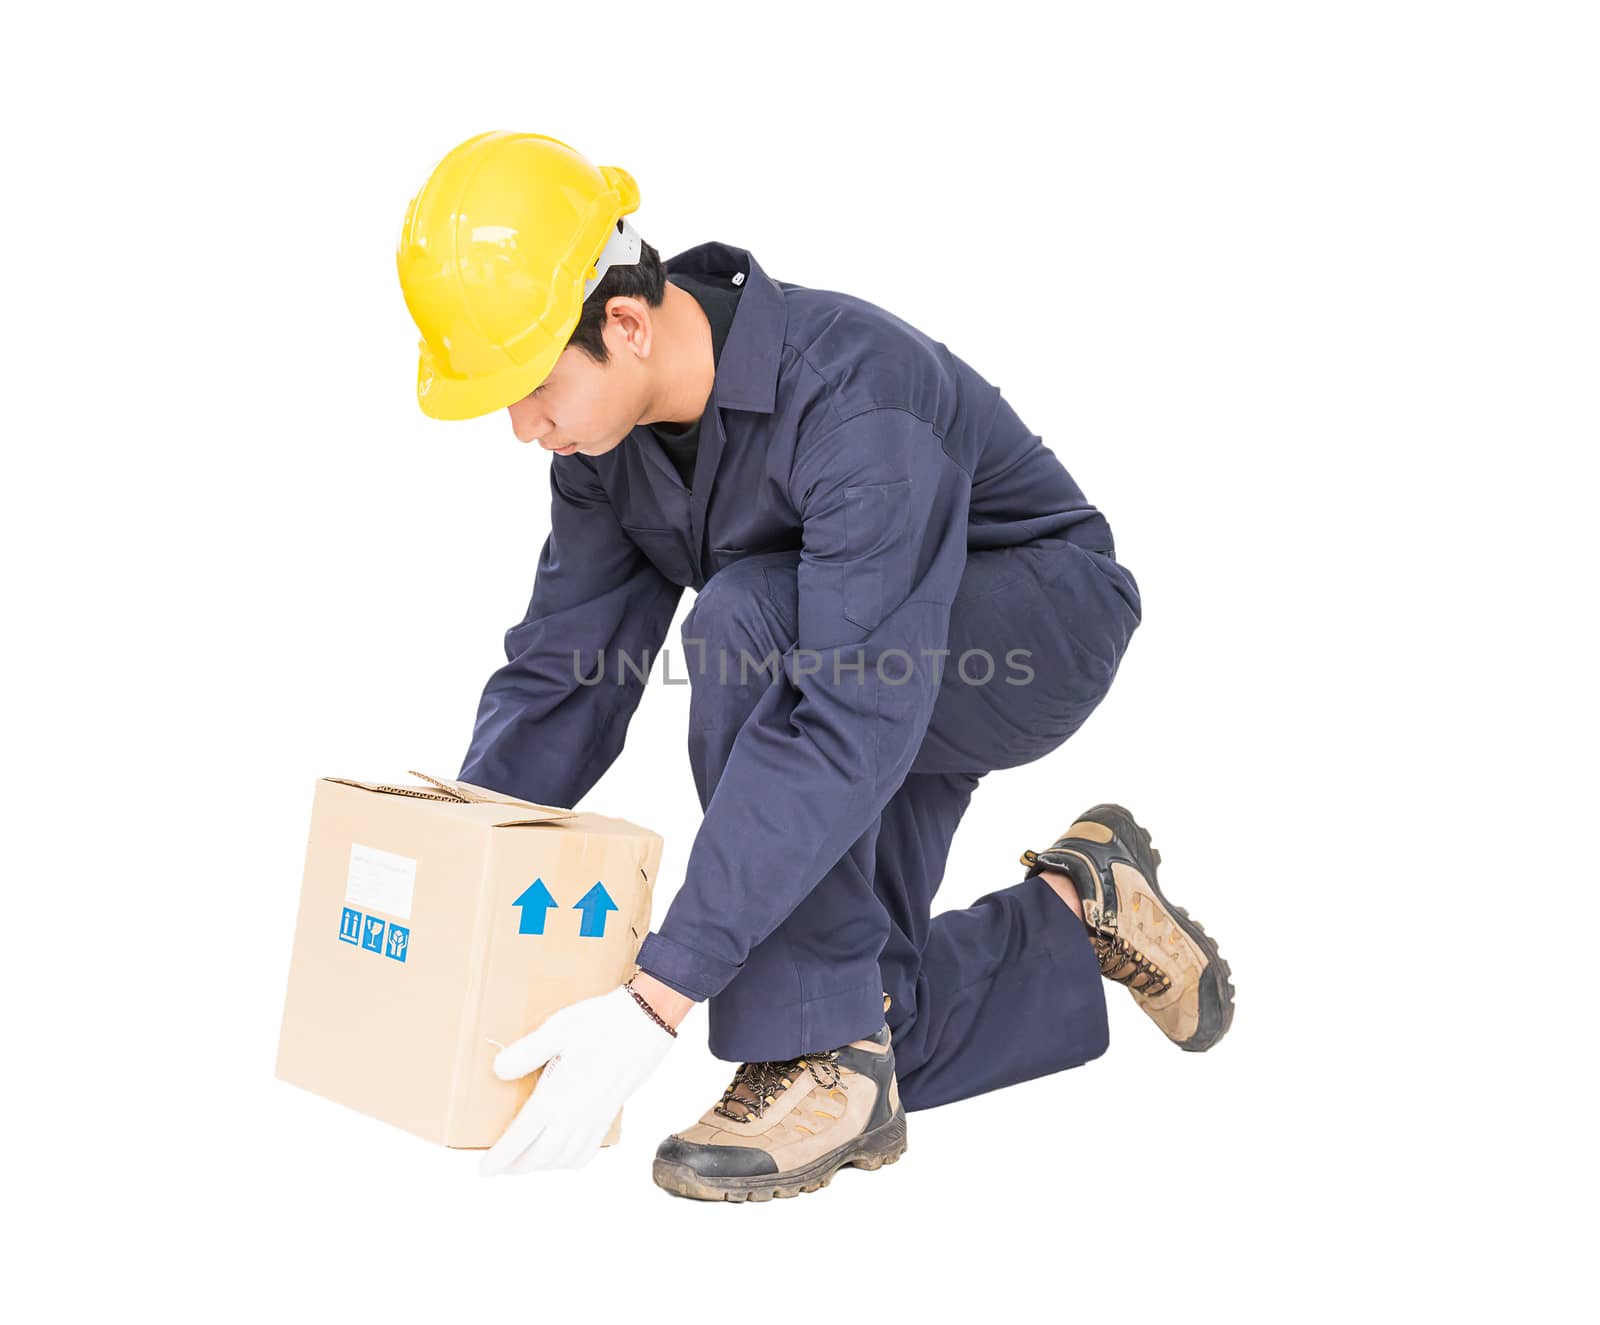 Man in uniform lifting the paper box, Isolated on white background